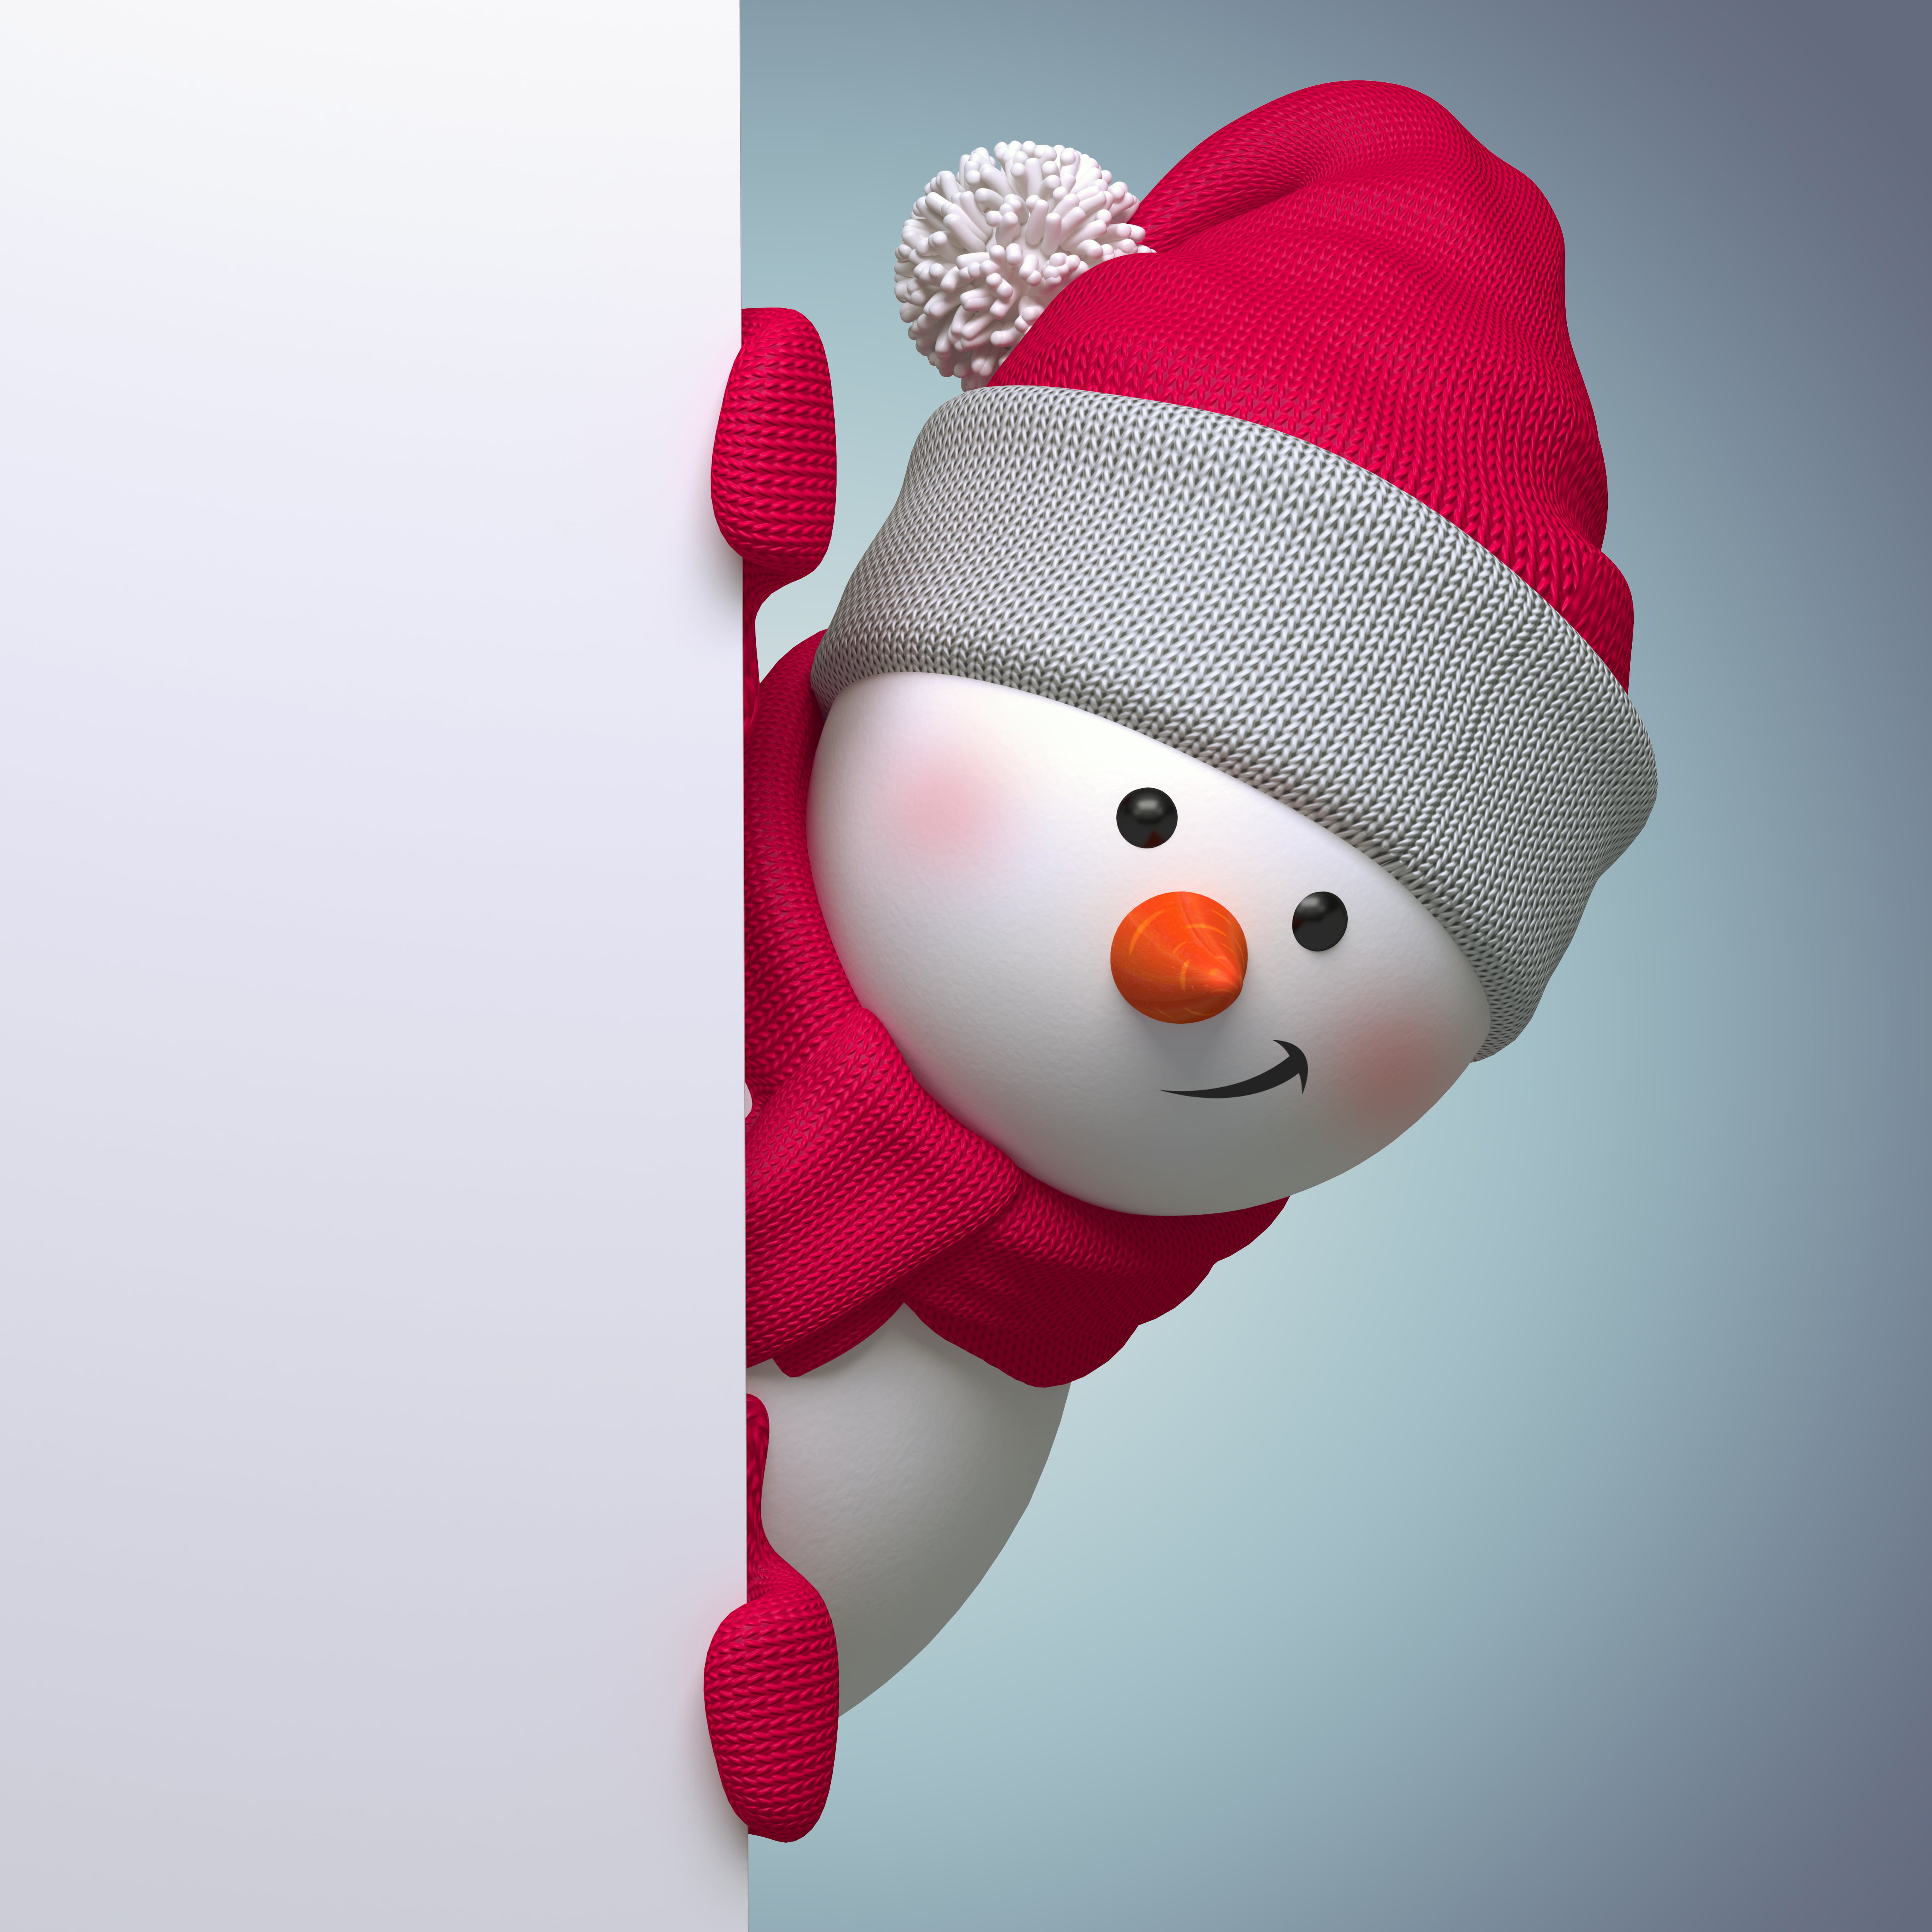 snowman illustration, rendering, new year, christmas, cute, banner